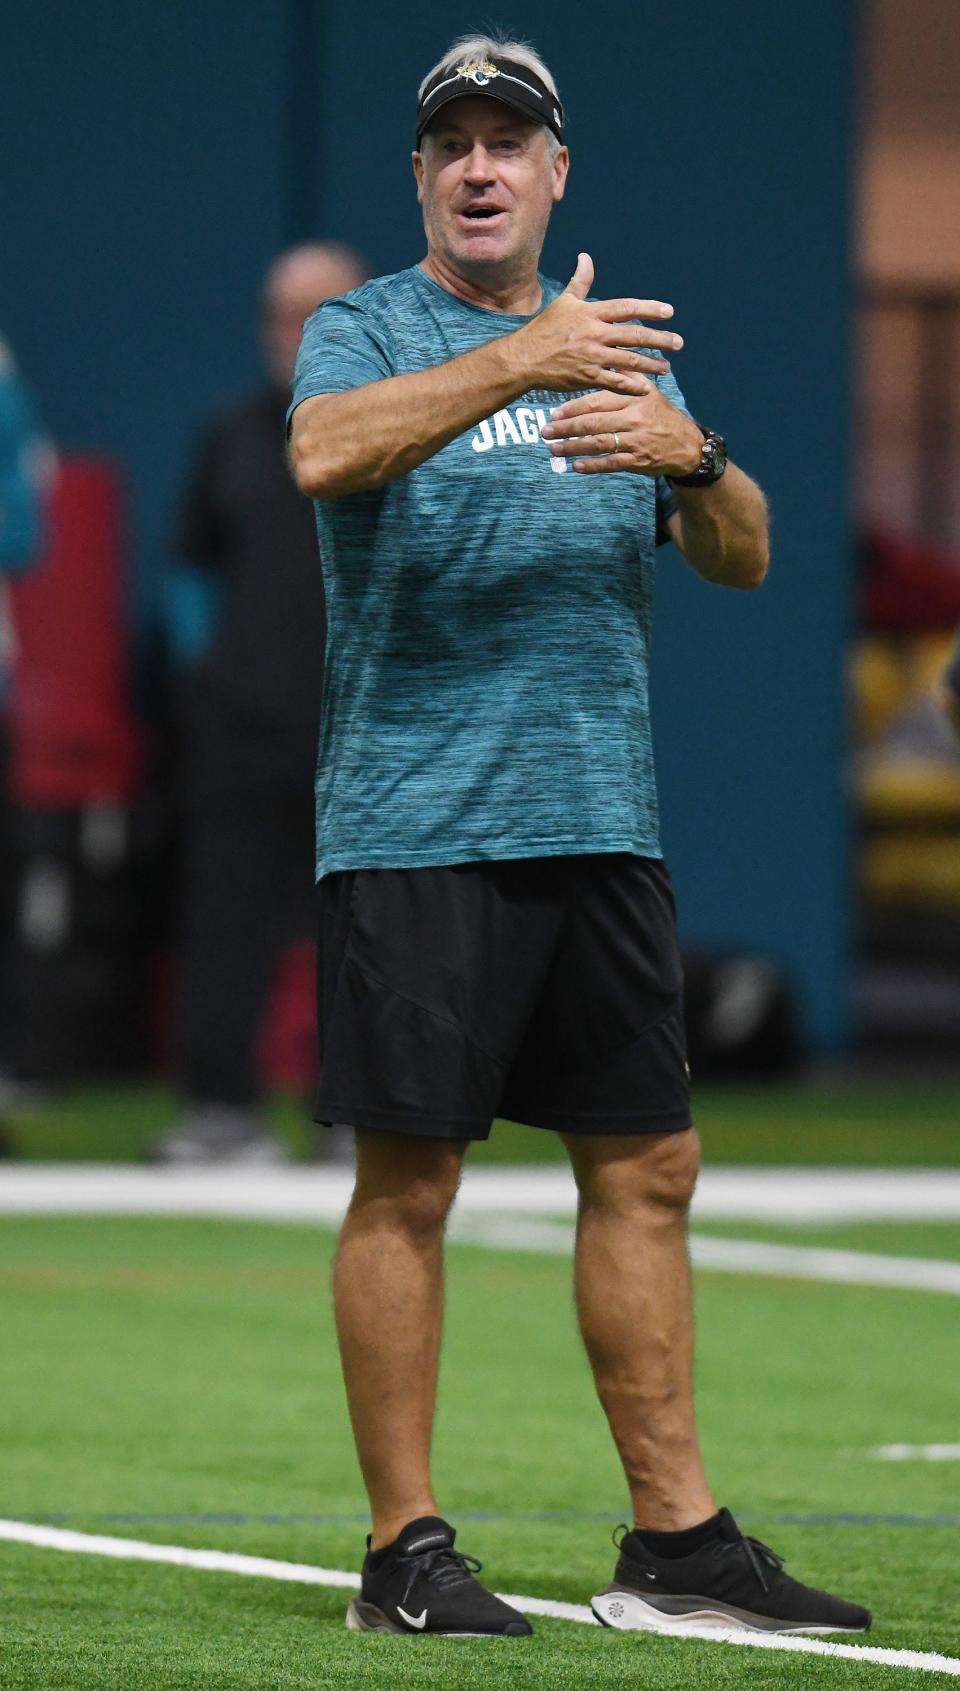 Jacksonville Jaguars Head Coach Doug Pederson on the field during the May 10 rookie minicamp session. The Jacksonville Jaguars held their first day of rookie minicamp inside the covered field at the Jaguars performance facility in Jacksonville, Fla.